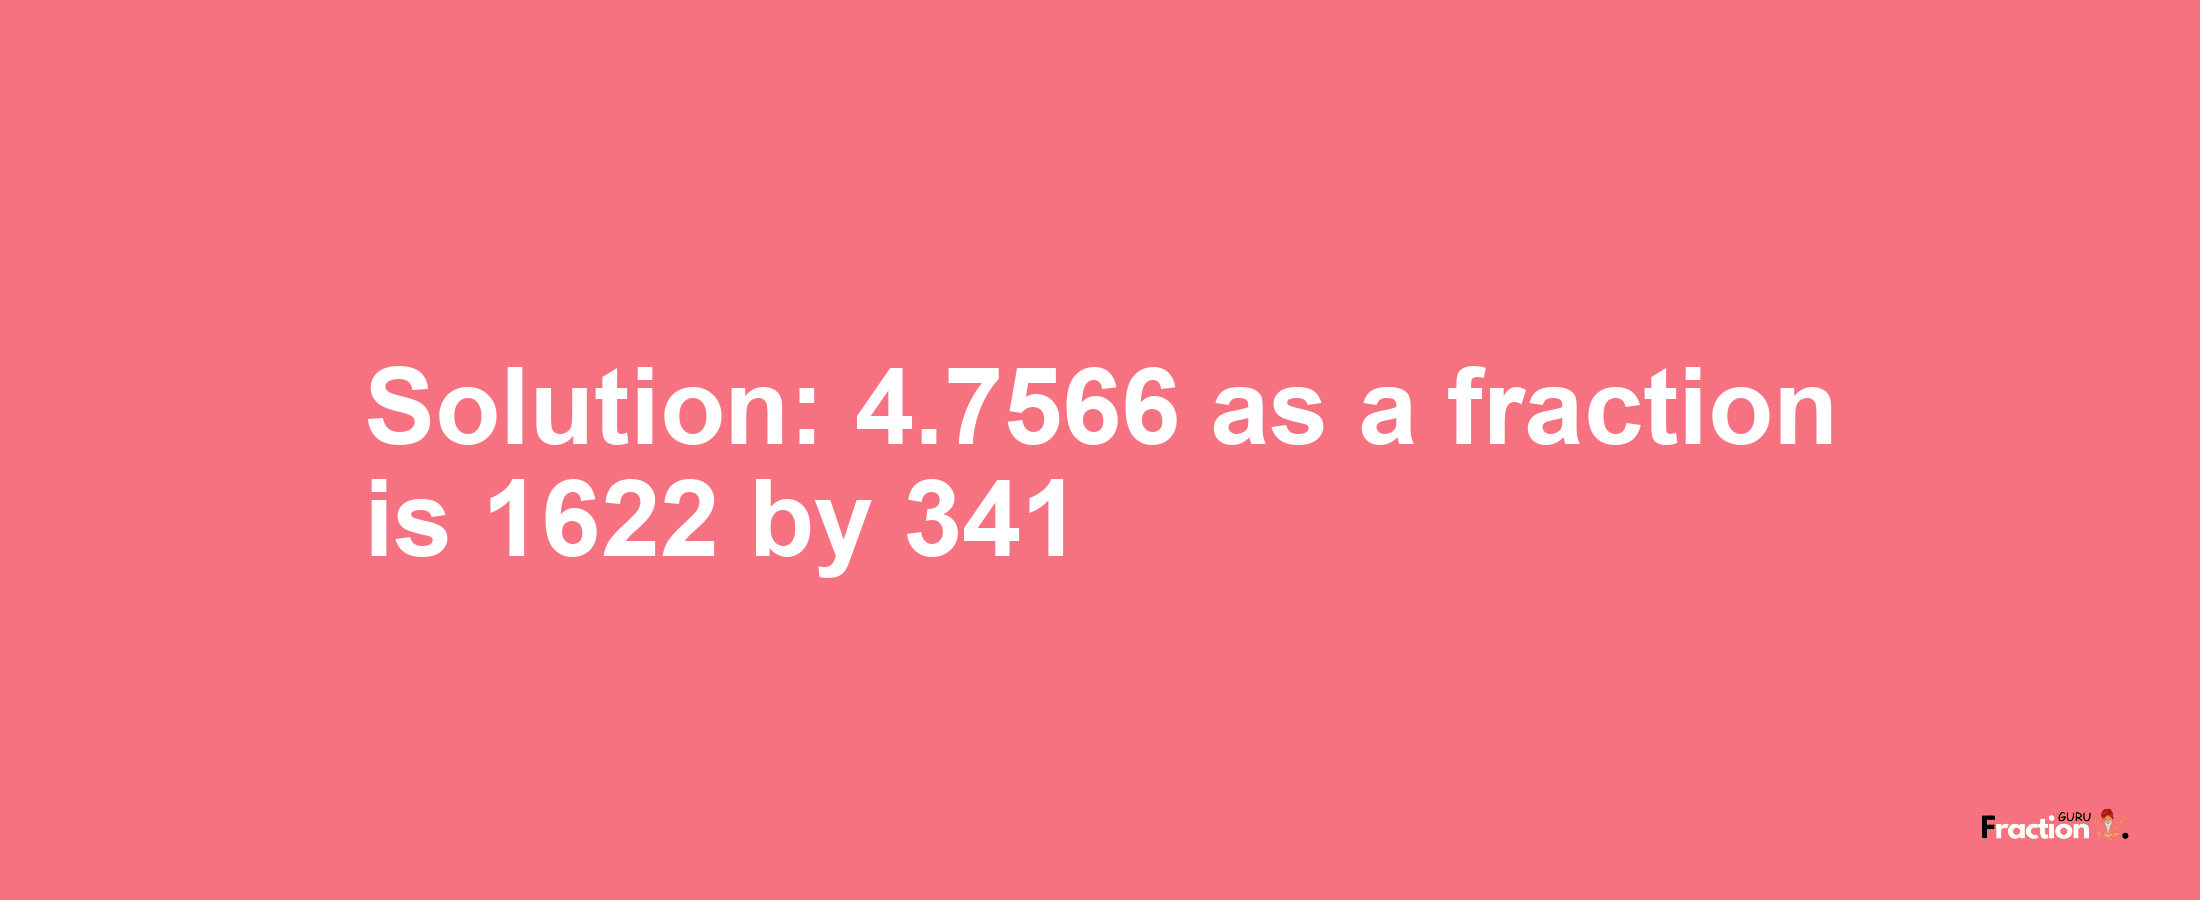 Solution:4.7566 as a fraction is 1622/341